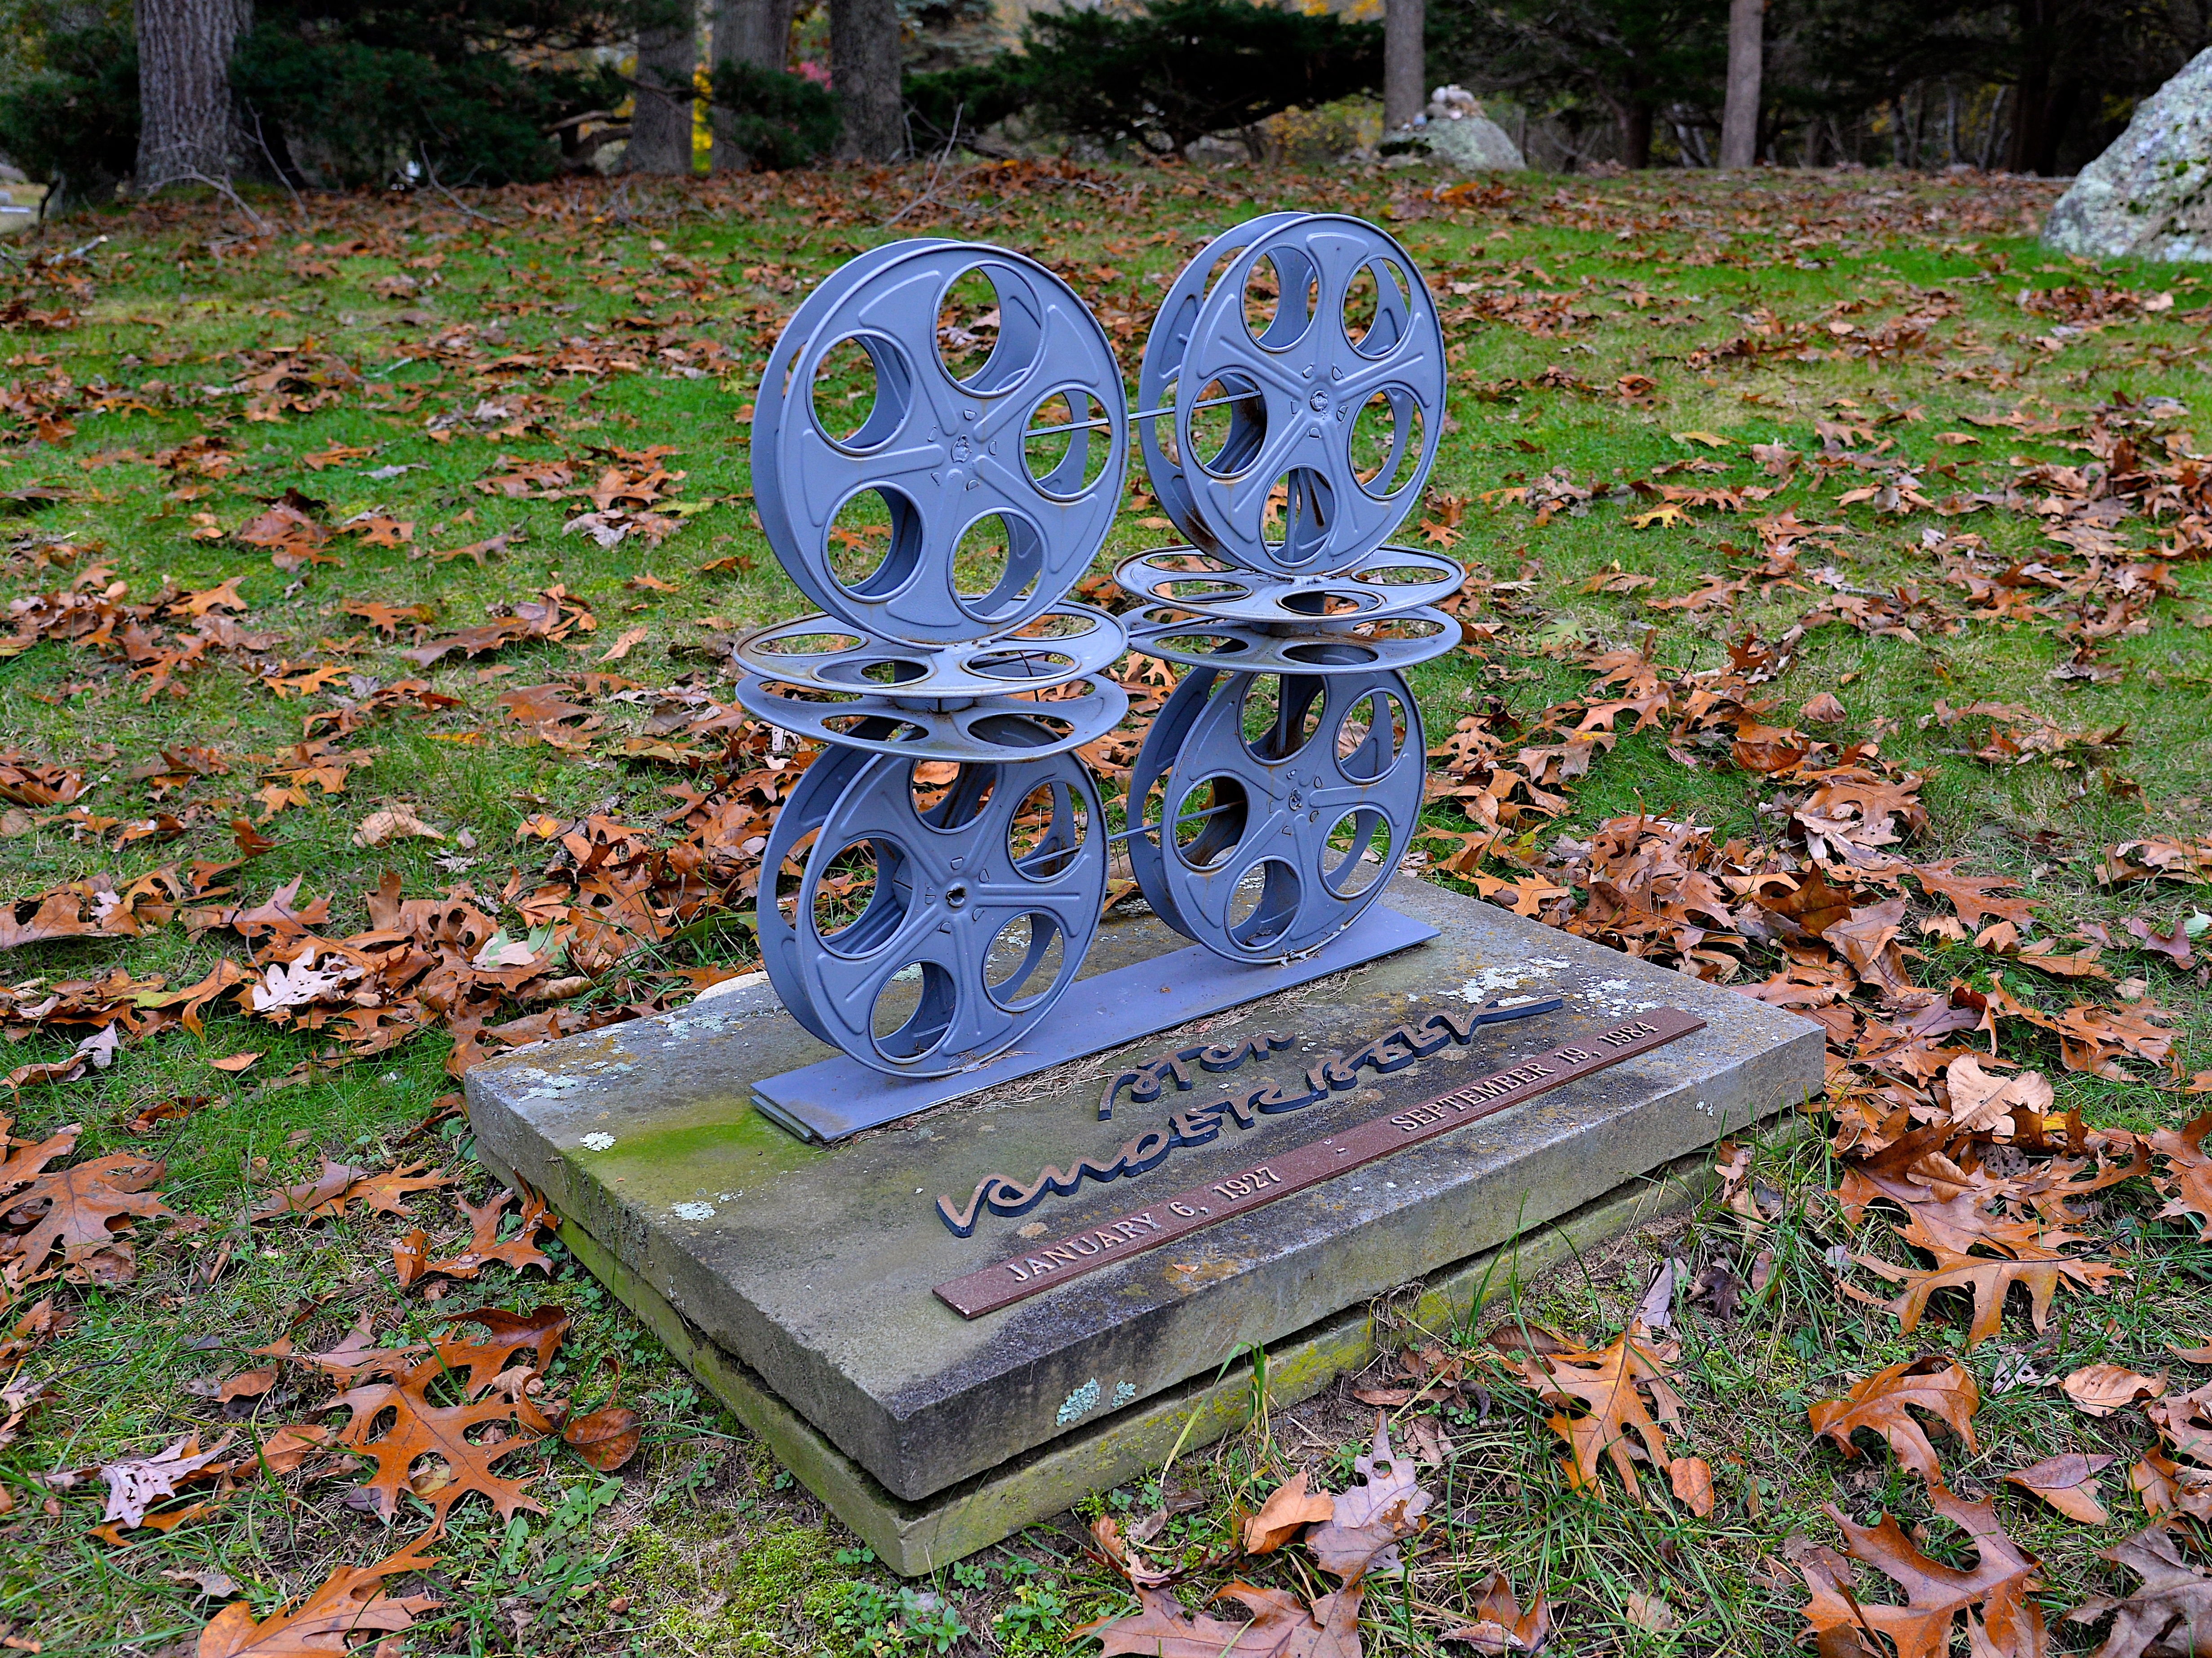 Stan VanDerBeek's headstone at Green River Cemetery. He was a visual artist, film maker, and early proponent of computer animation in the 1950s. KYRIL BROMLEY